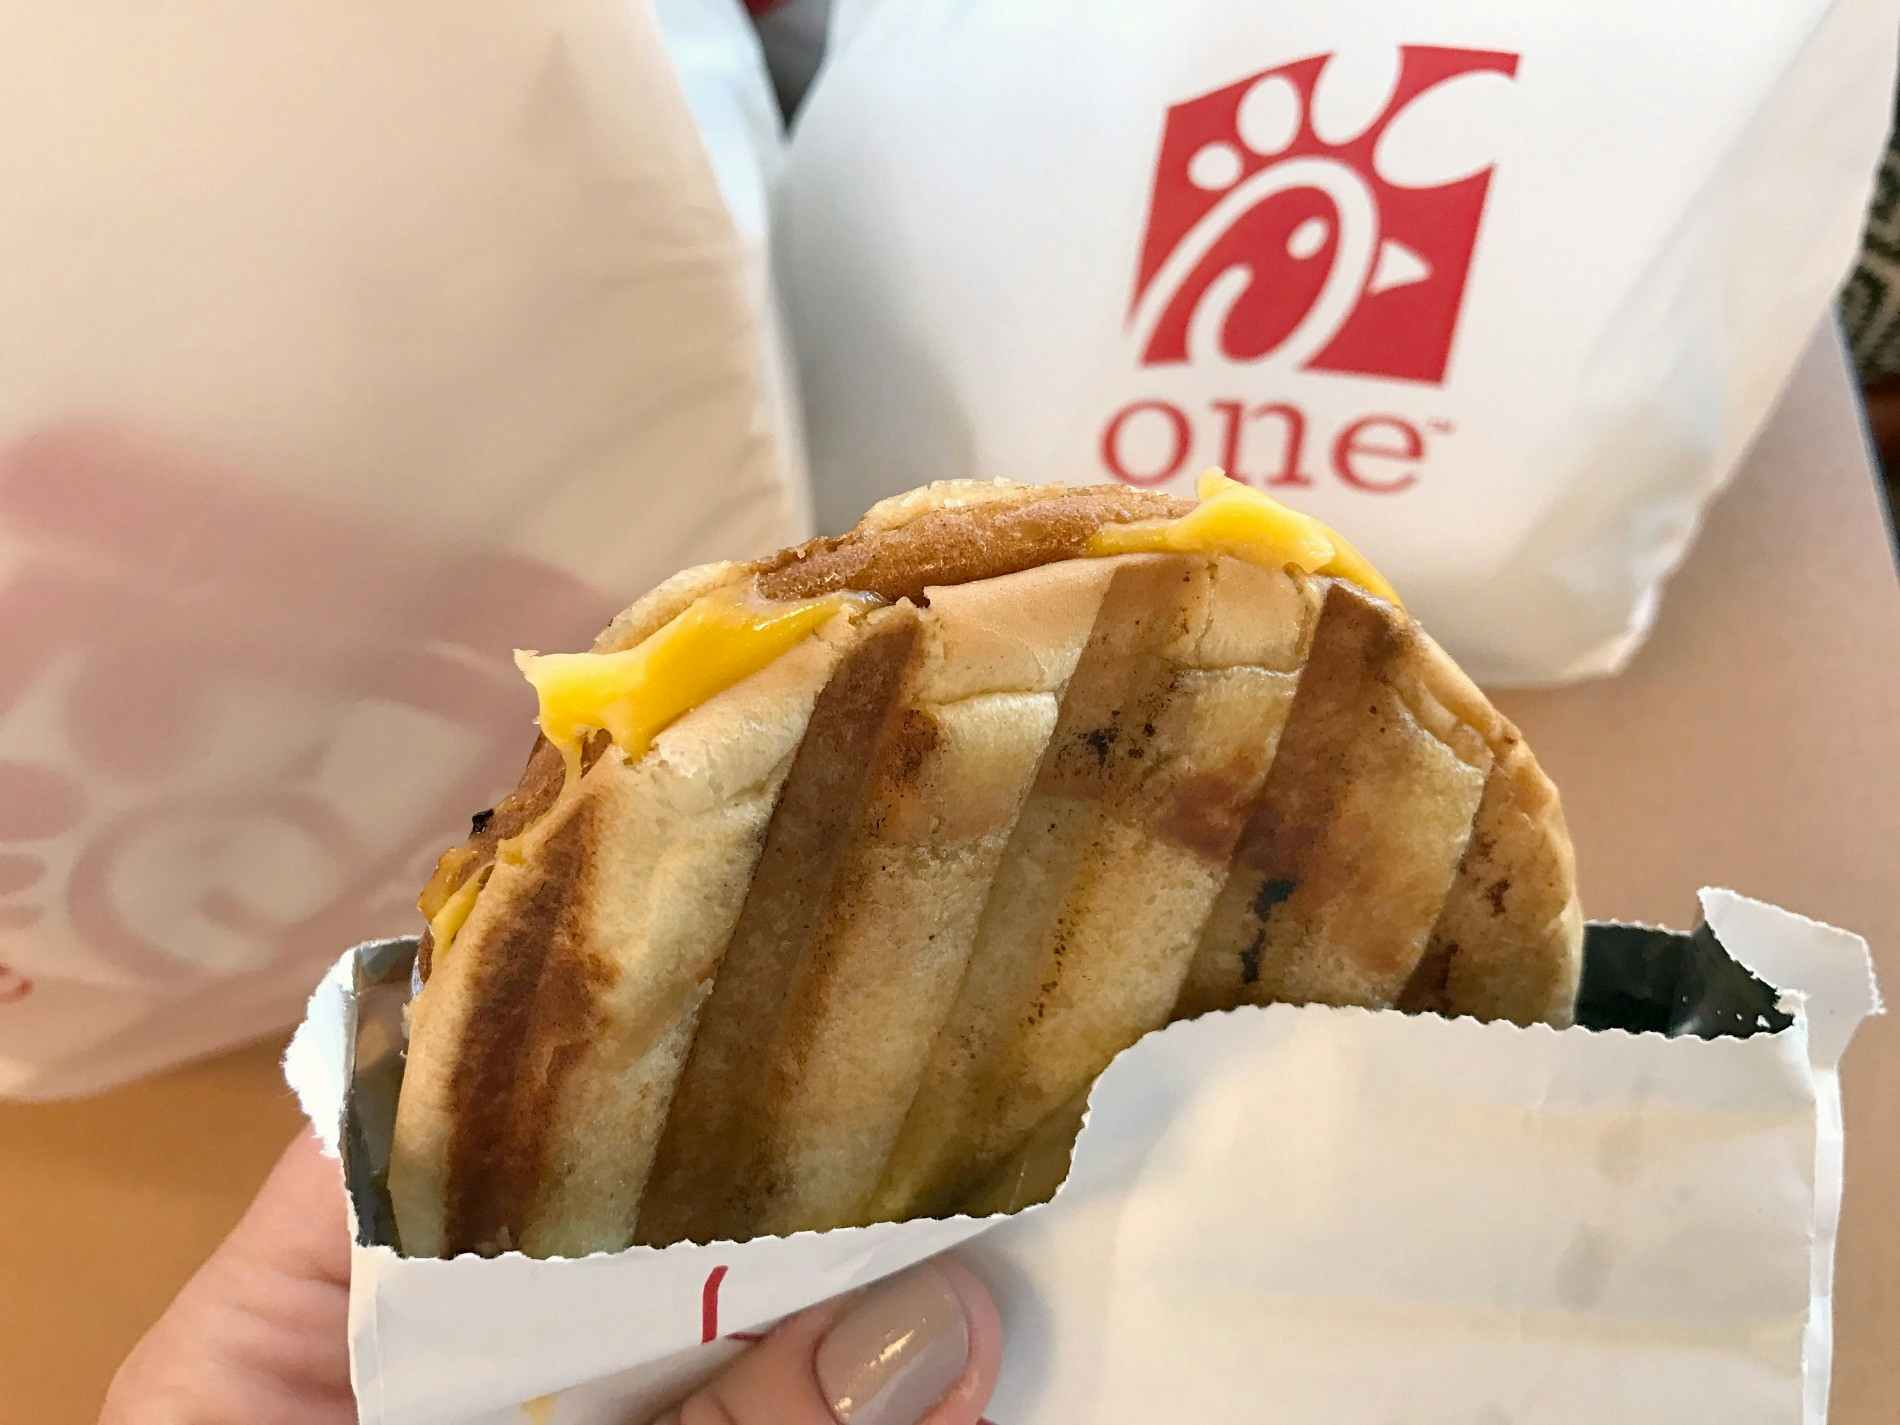 A close-up of a grilled cheese sandwich from Chick-fil-A.